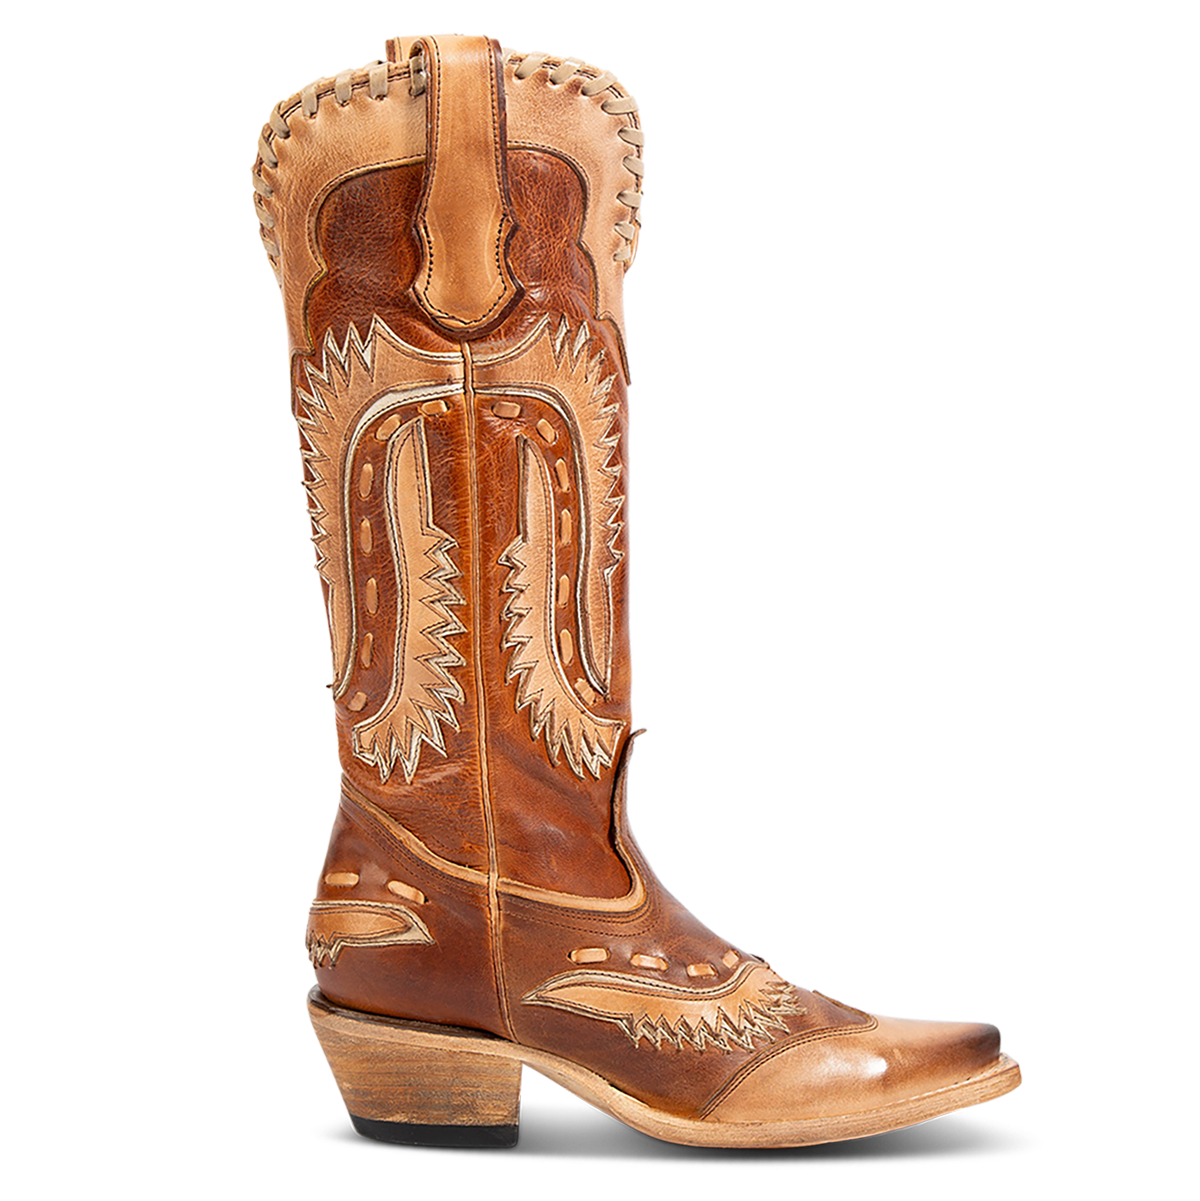 FREEBIRD women's Wayne cognac multi leather western mid-calf boot with whip-stitch and laser cut detailing, a snip toe and inside working brass zipper